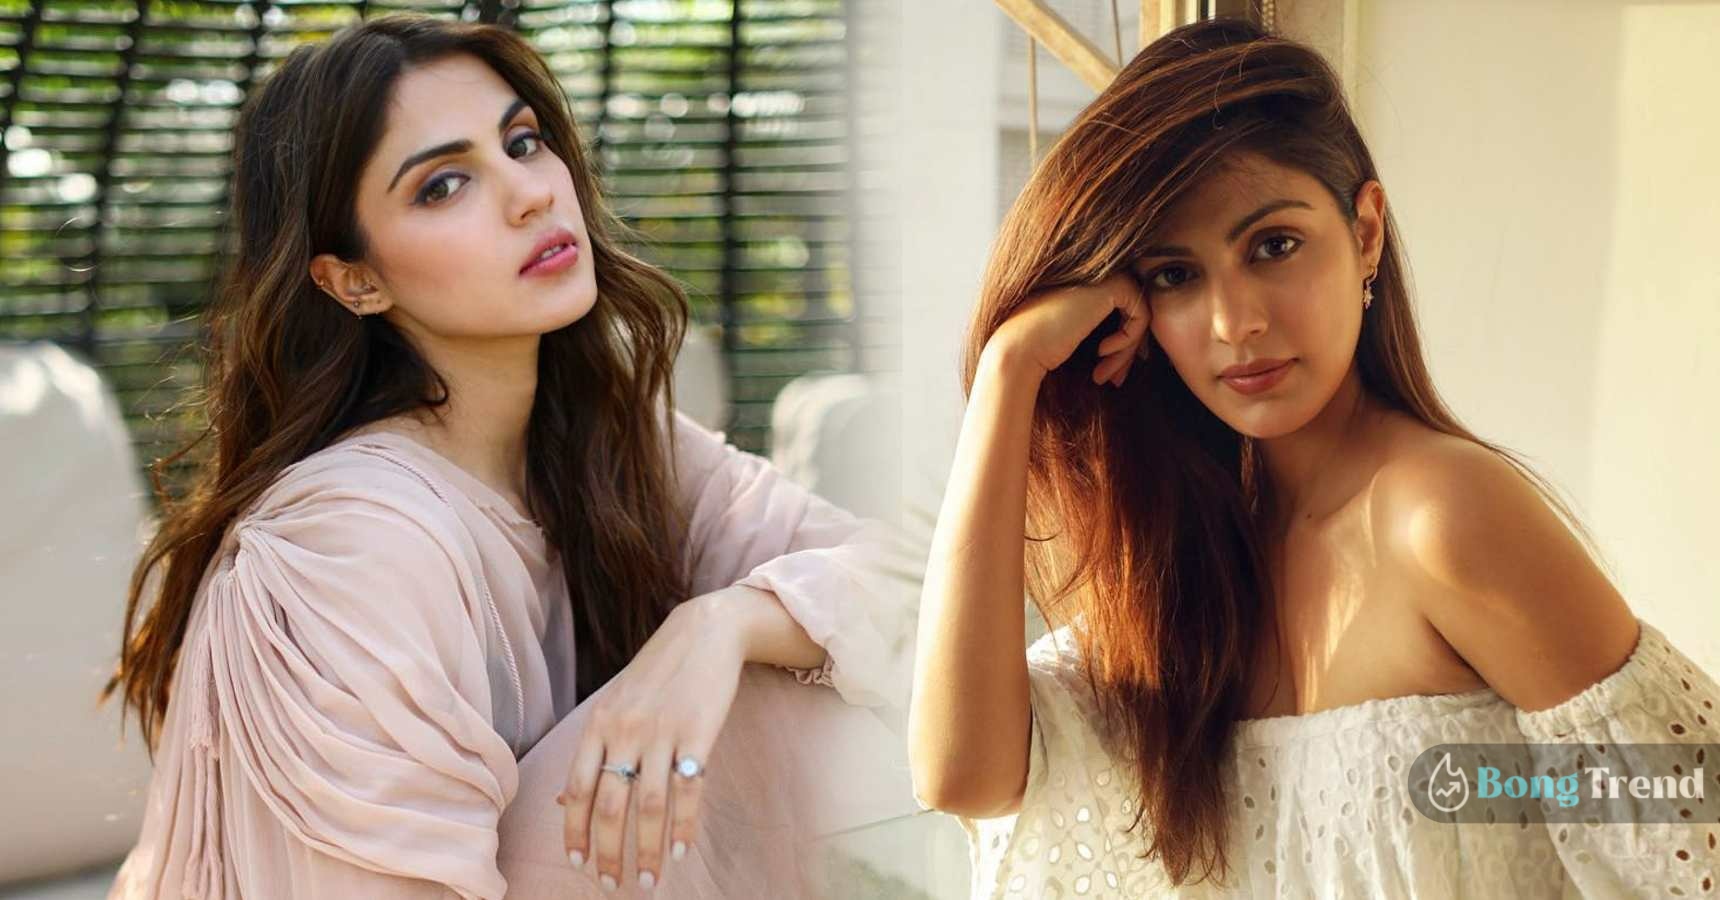 What Rhea Chakraborty did on her last day in Jail revealed